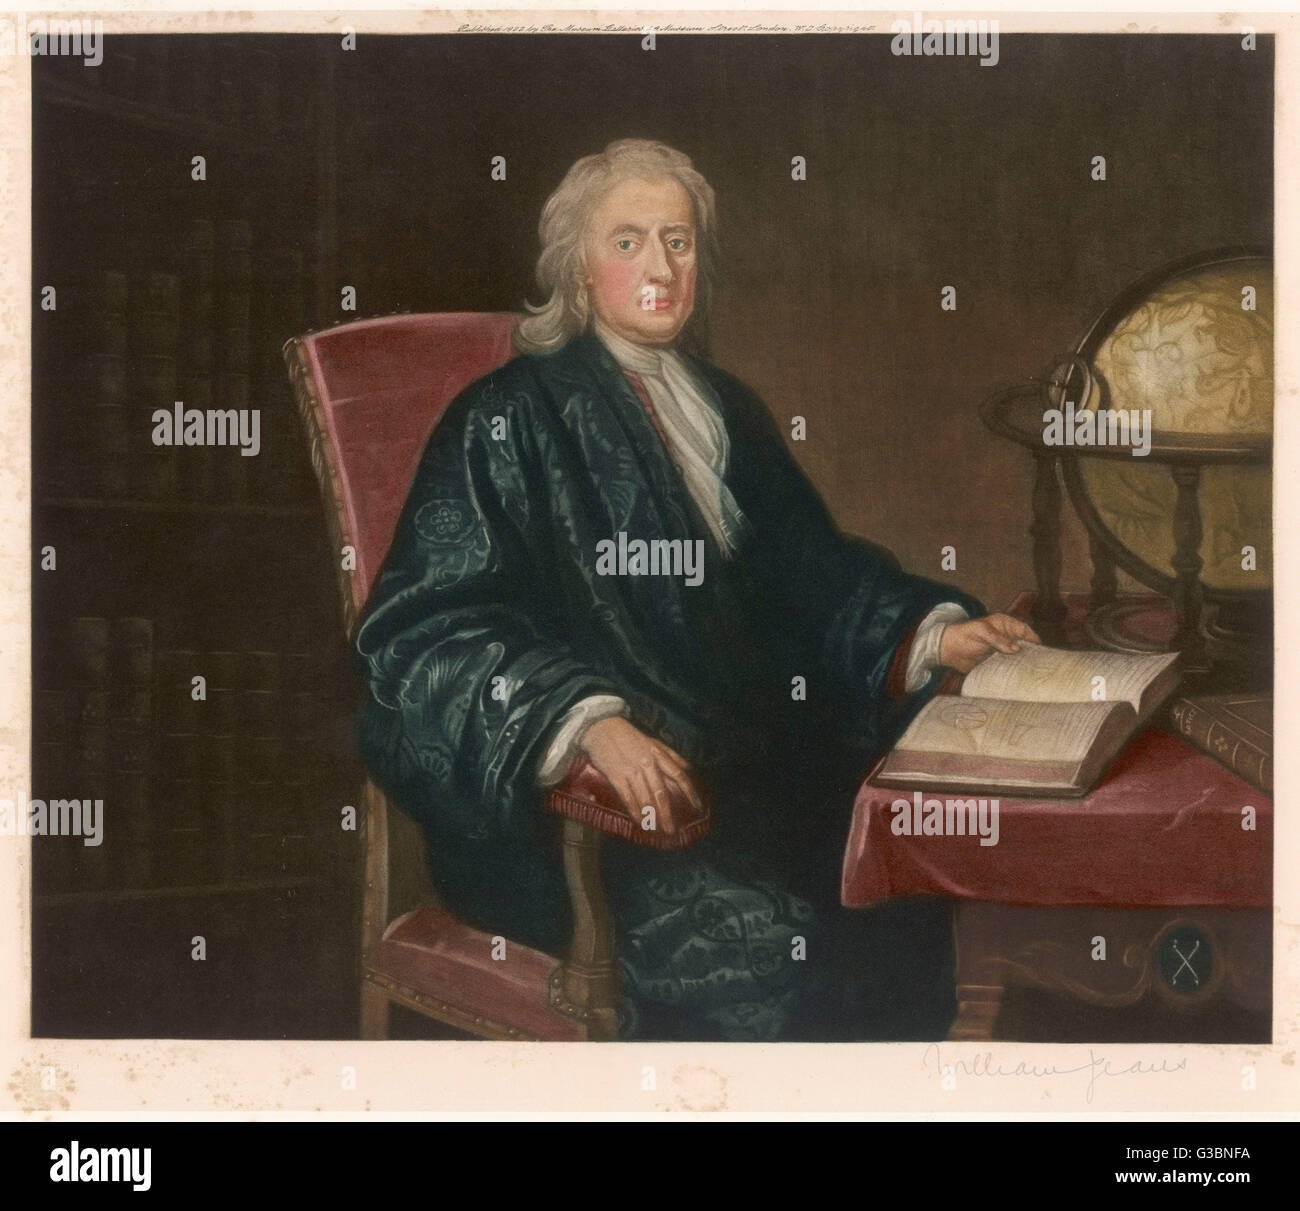 SIR ISAAC NEWTON - Mathematician and physicist,  seated at his work-table,  circa 1726.       Date: 1642-1727 Stock Photo